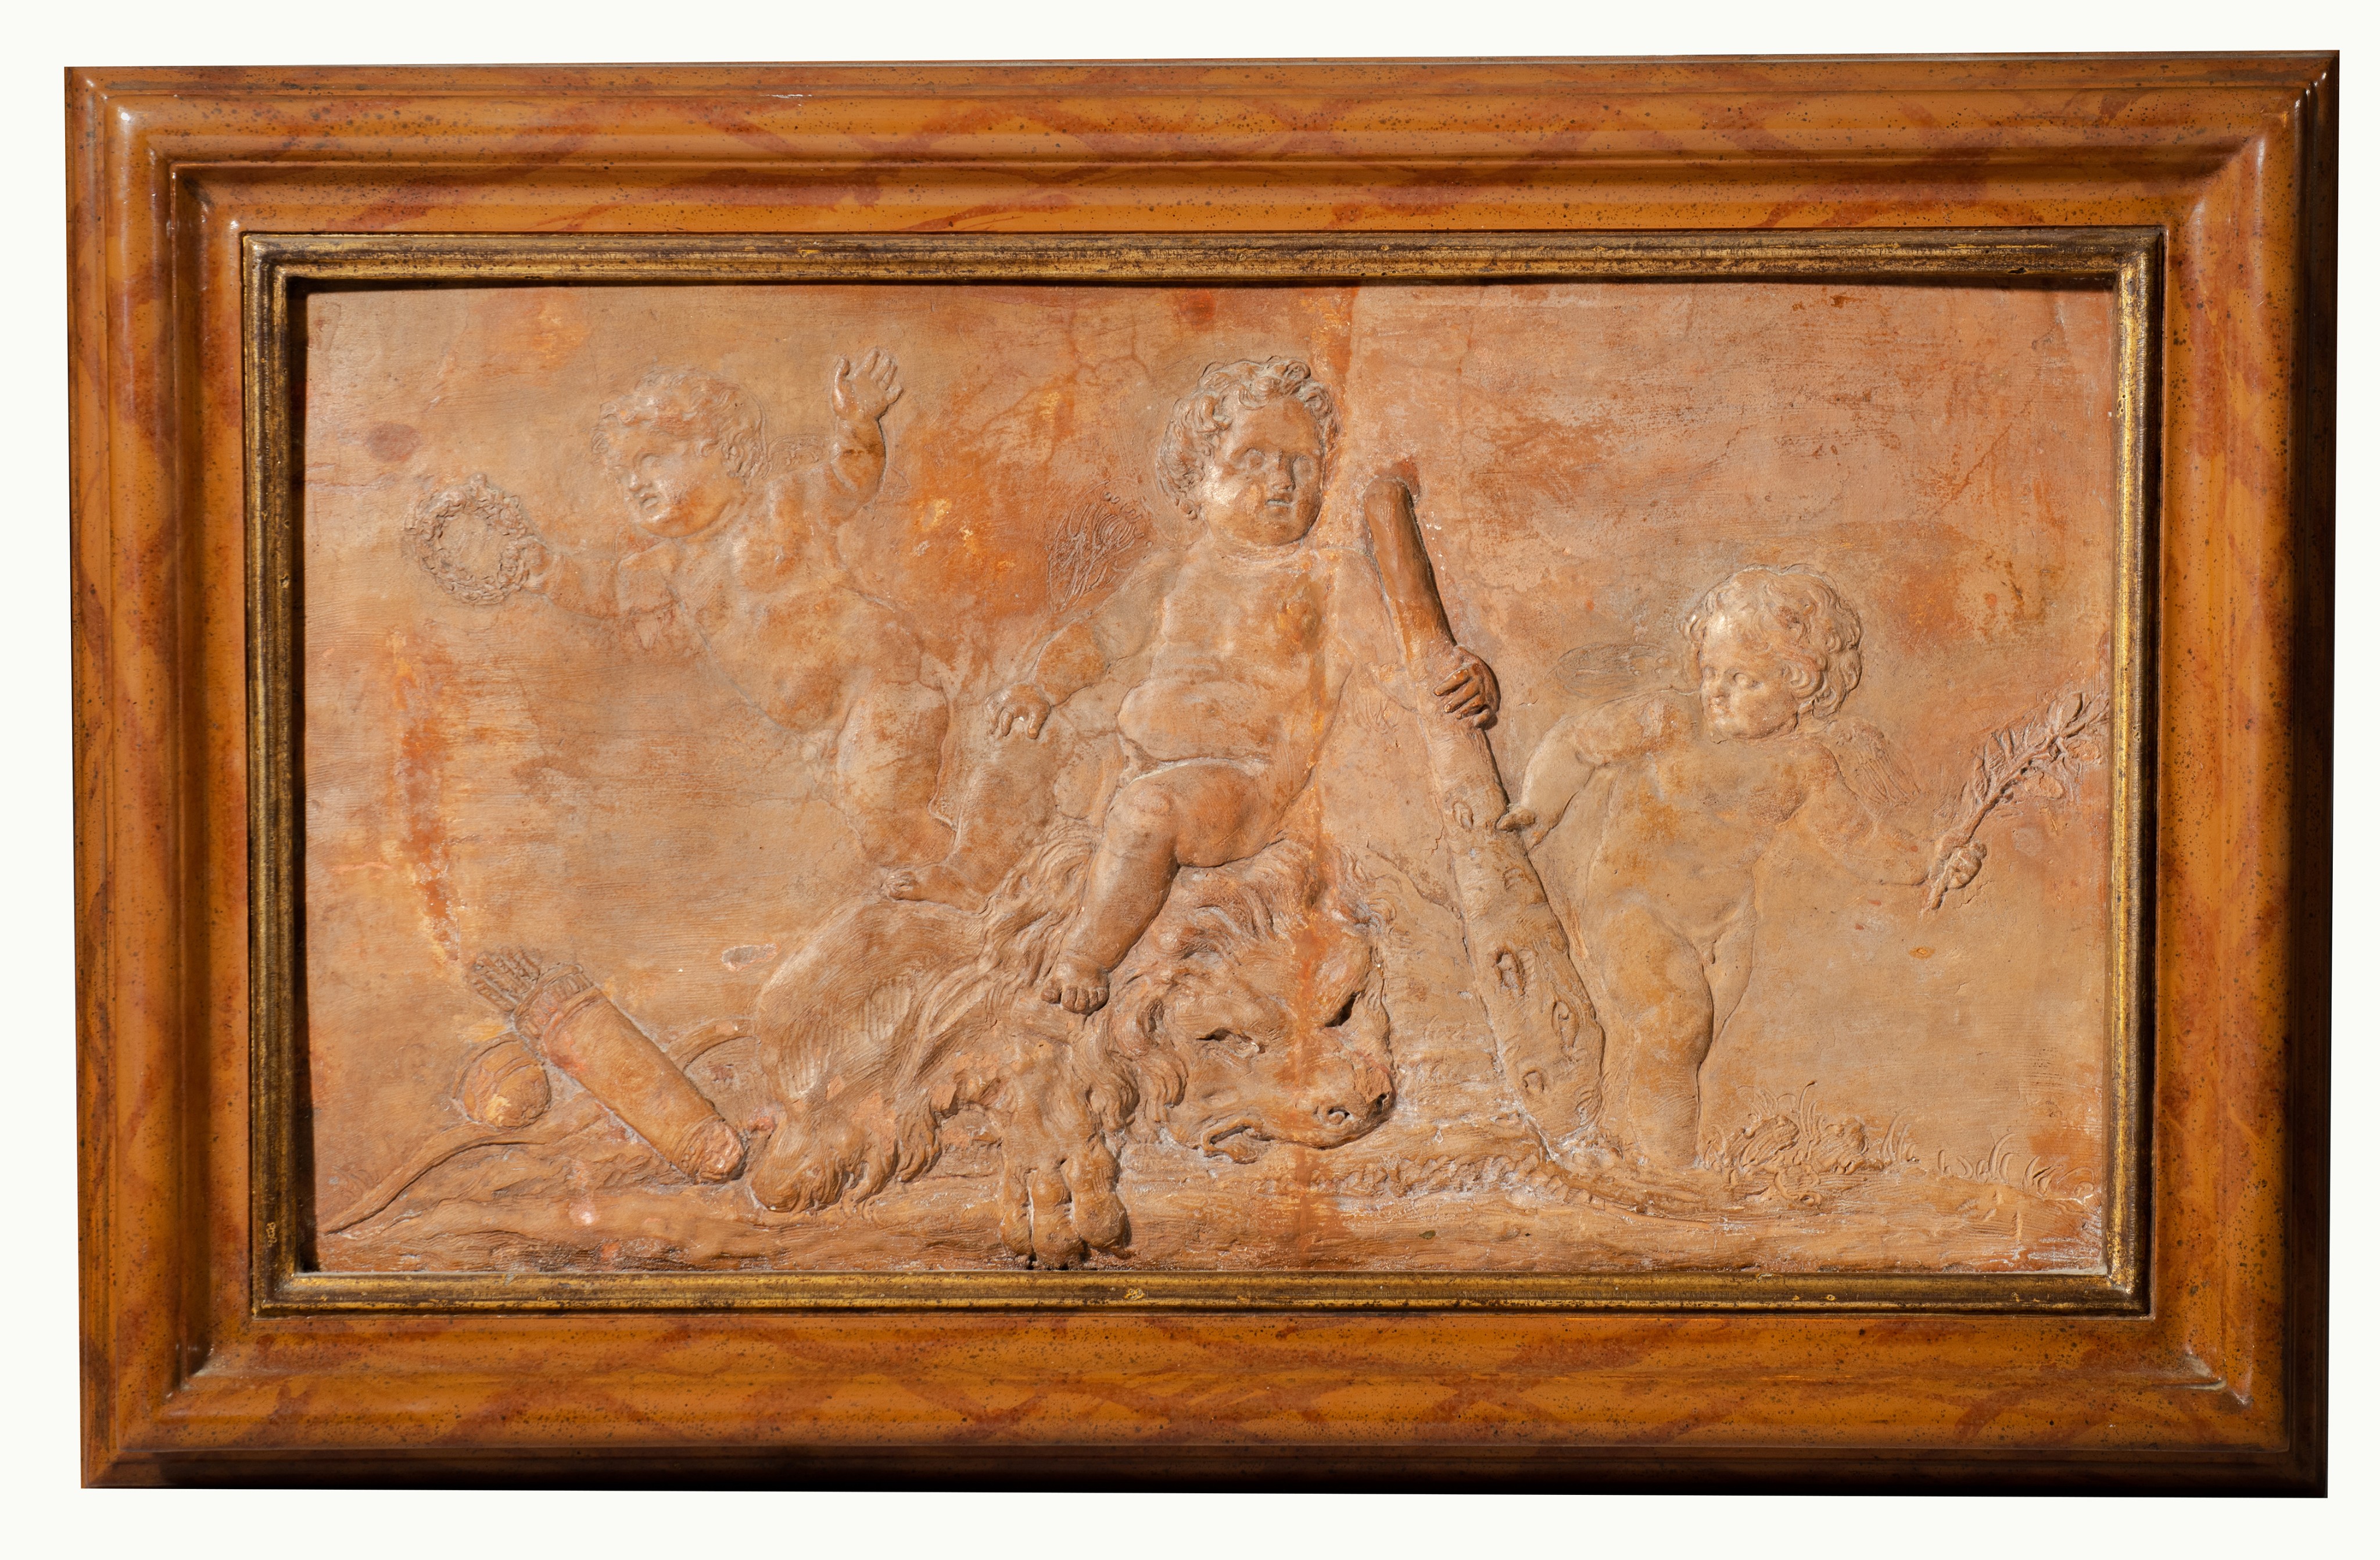 A fine terracotta basso-relievo plaque depicting the young Hercules, 18th/19thC, 31 x 55 cm - Image 2 of 10